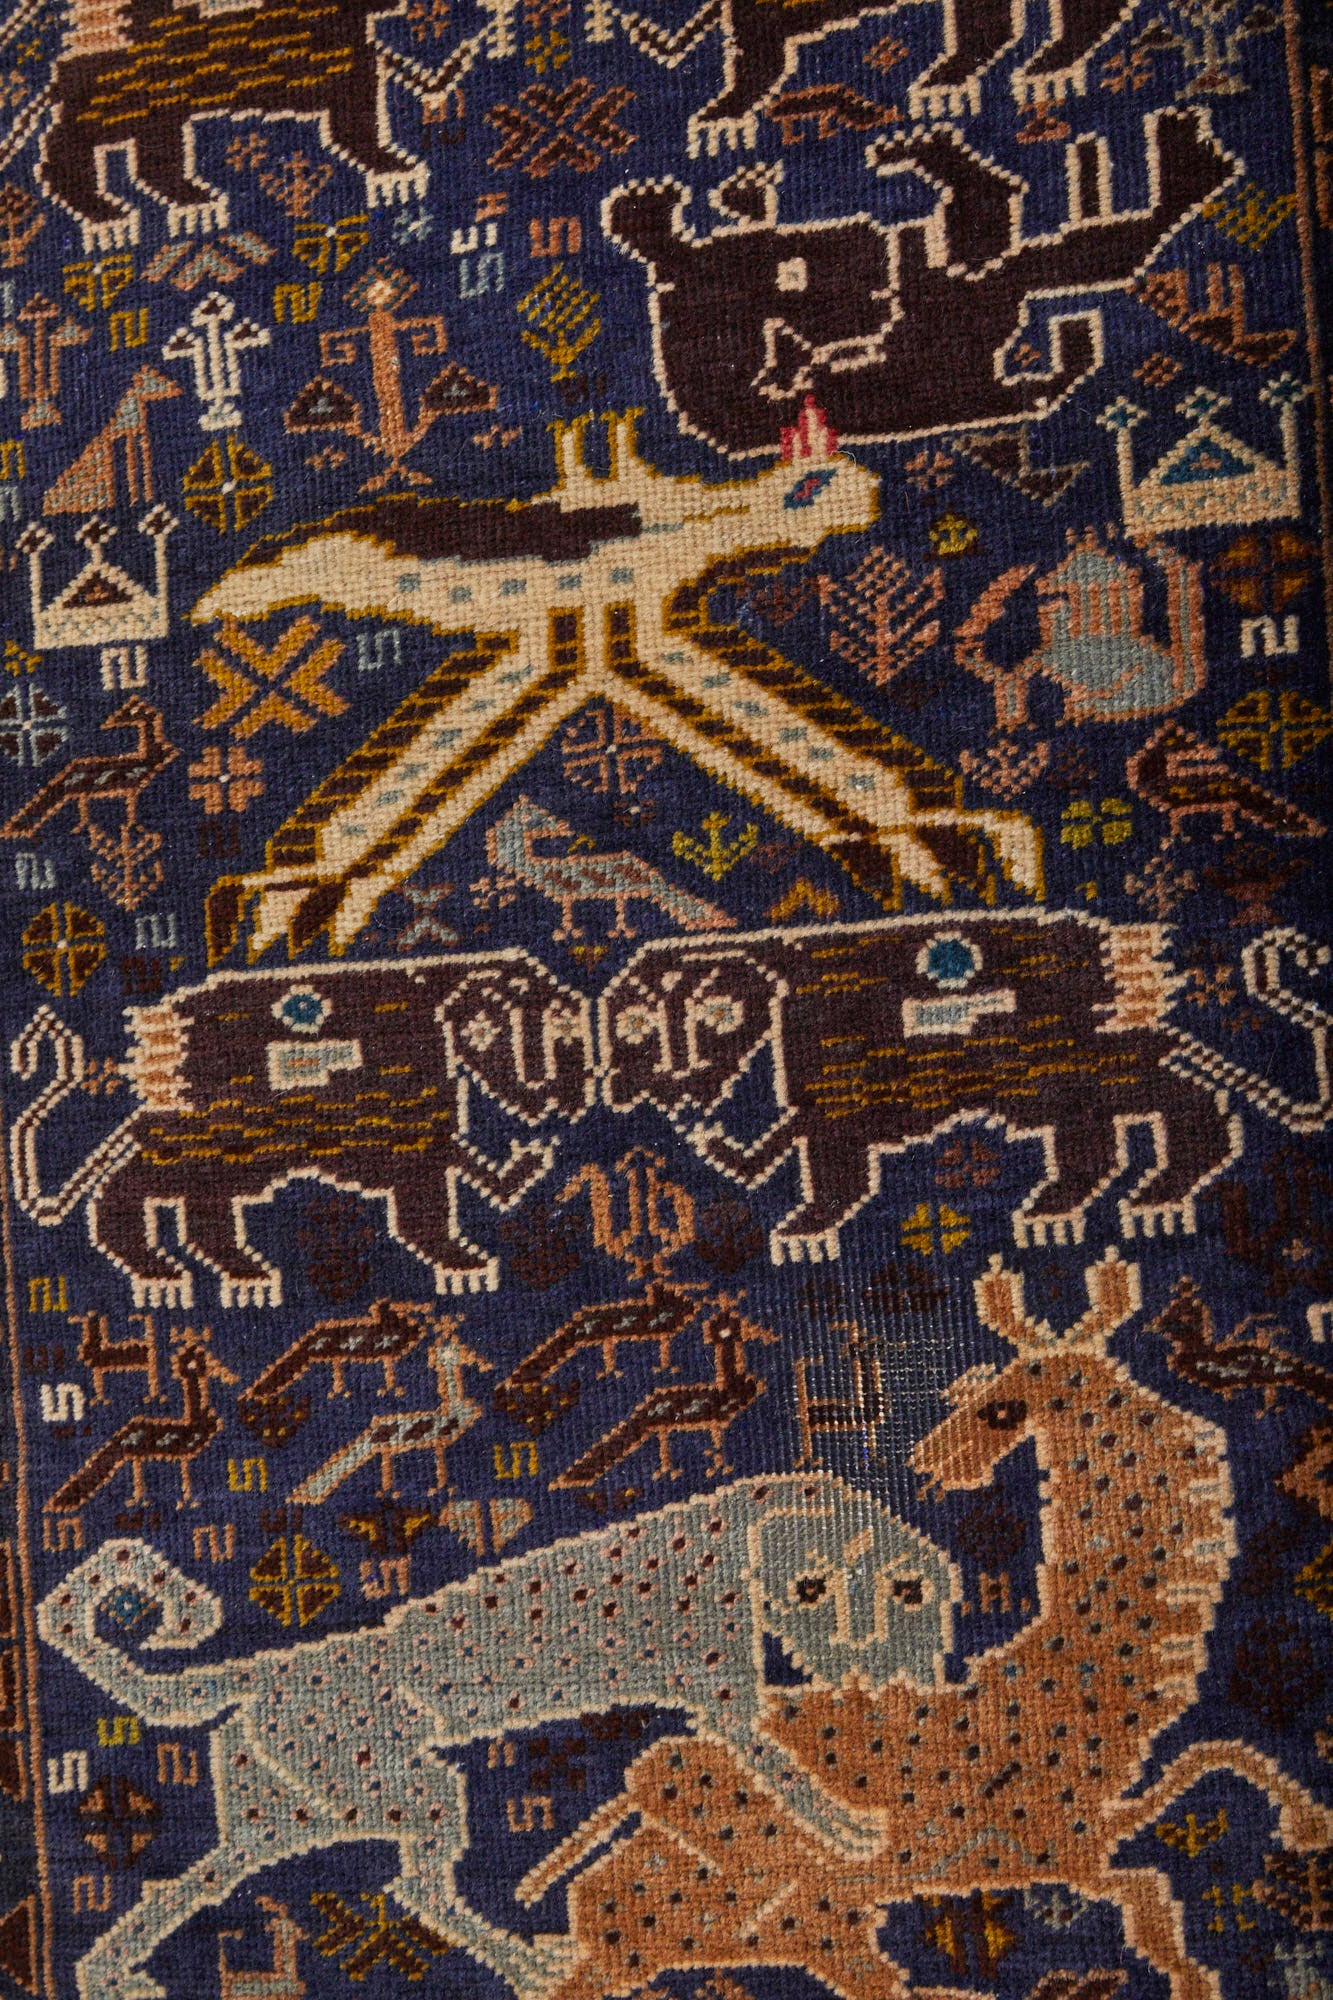 Close-up of handwoven Afghan Shikargah pictorial rug depicting leopard or tiger attacking a deer on dark blue background, surrounded by symbols -  Available from King Kennedy Rugs Los Angeles